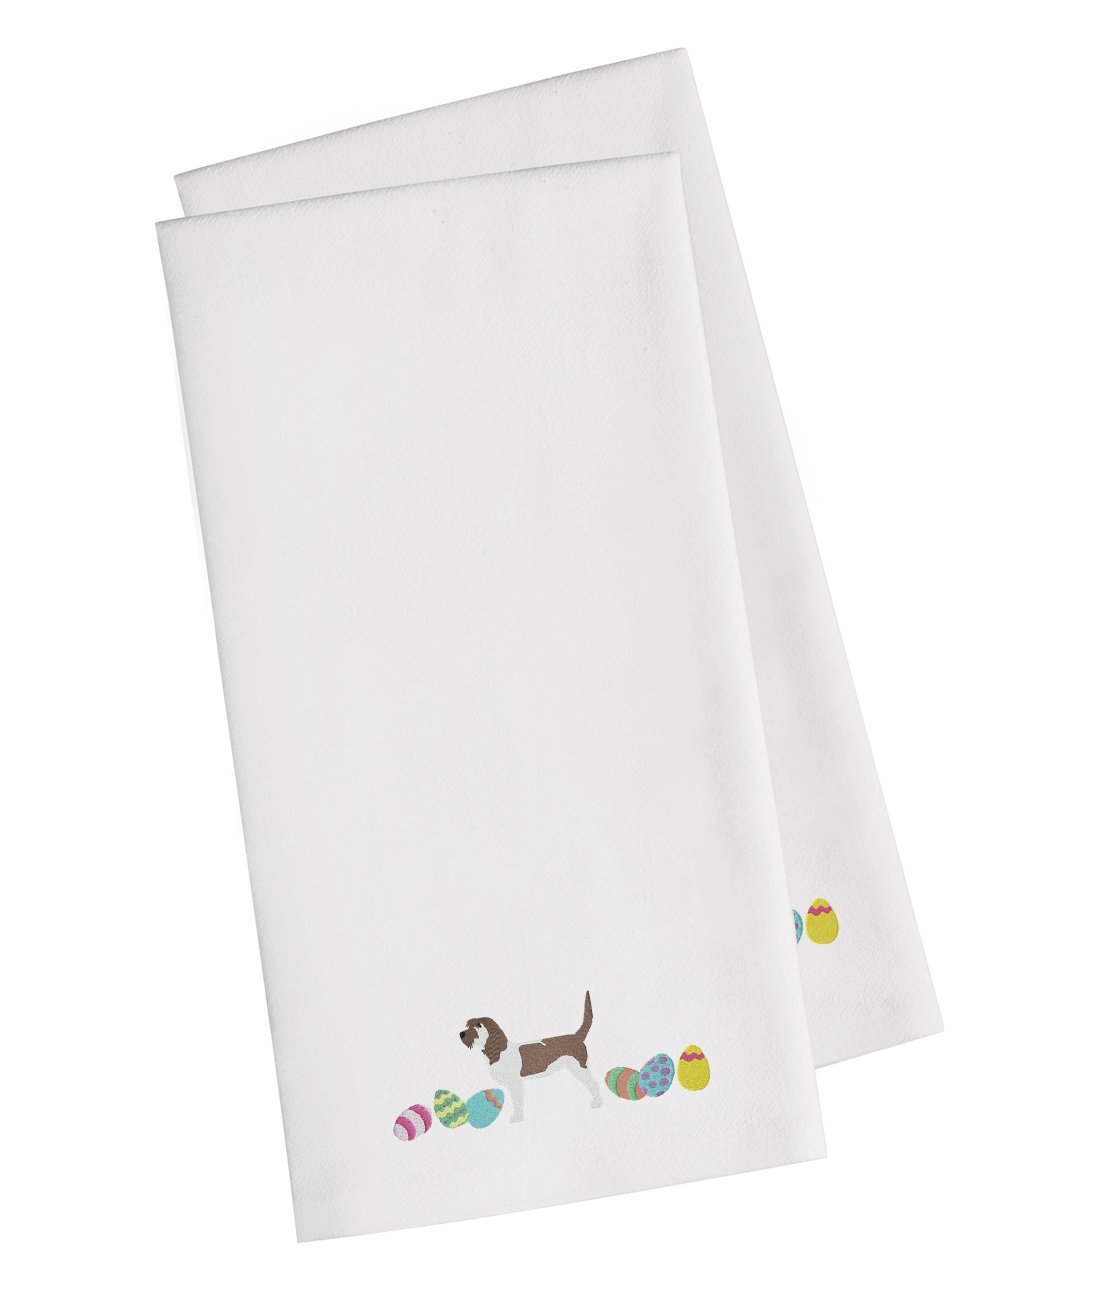 Grand Basset Griffon Easter White Embroidered Kitchen Towel Set of 2 CK1648WHTWE by Caroline's Treasures